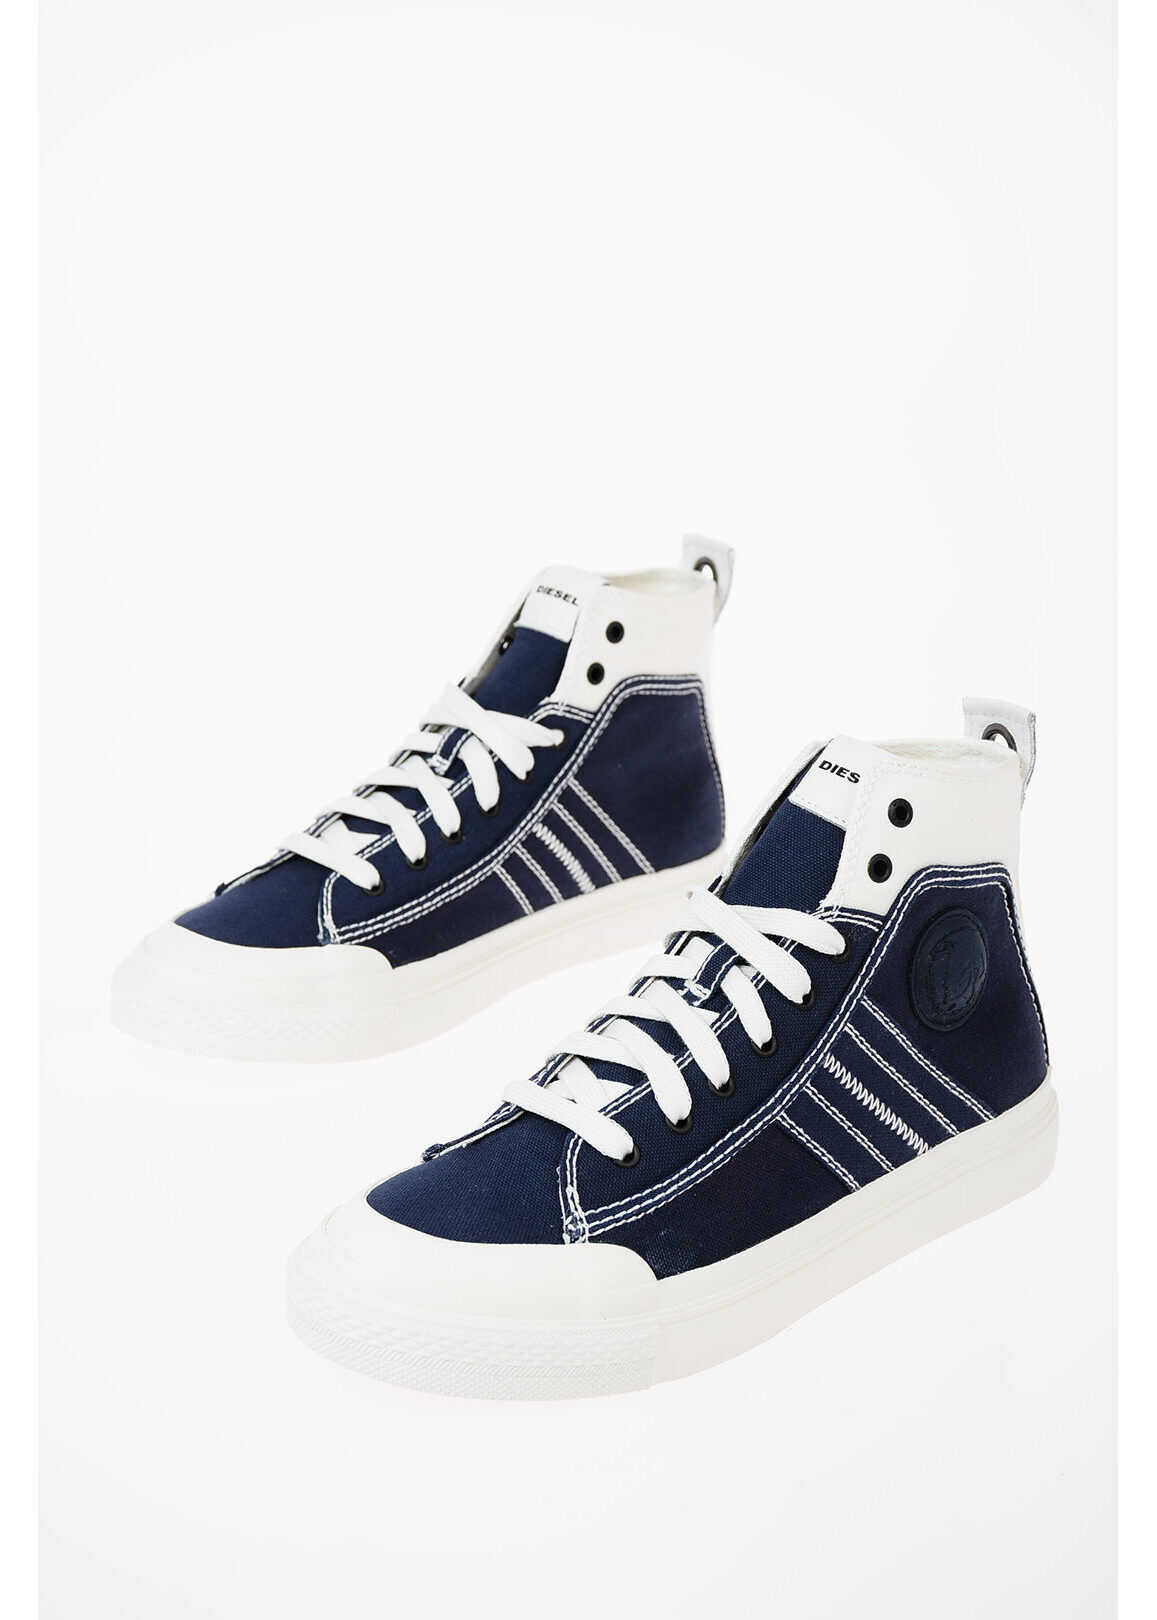 Diesel Fabric ASTICO S-ASTICO MID LACE Sneakers BLUE